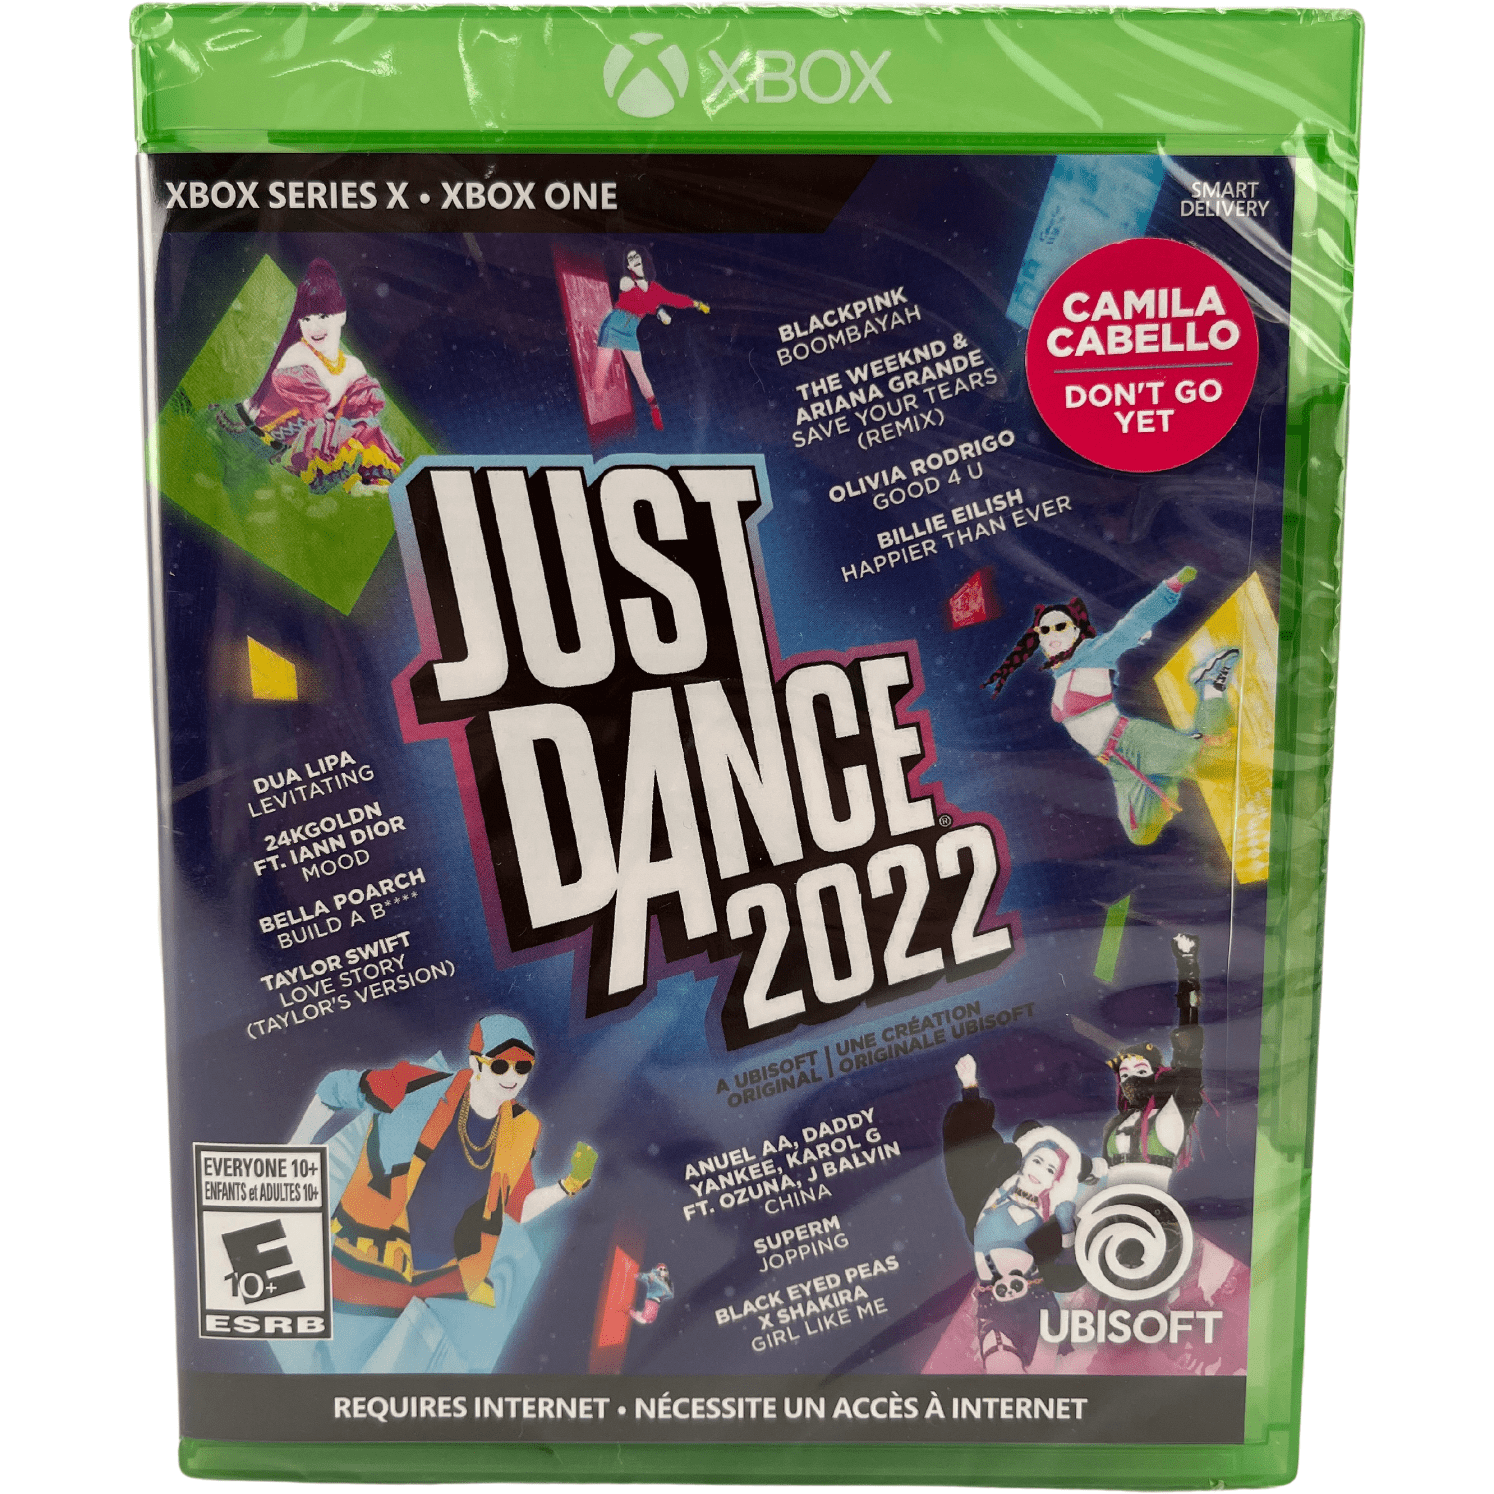 Xbox One / Xbox Series X Just Dance 2022 Video Game